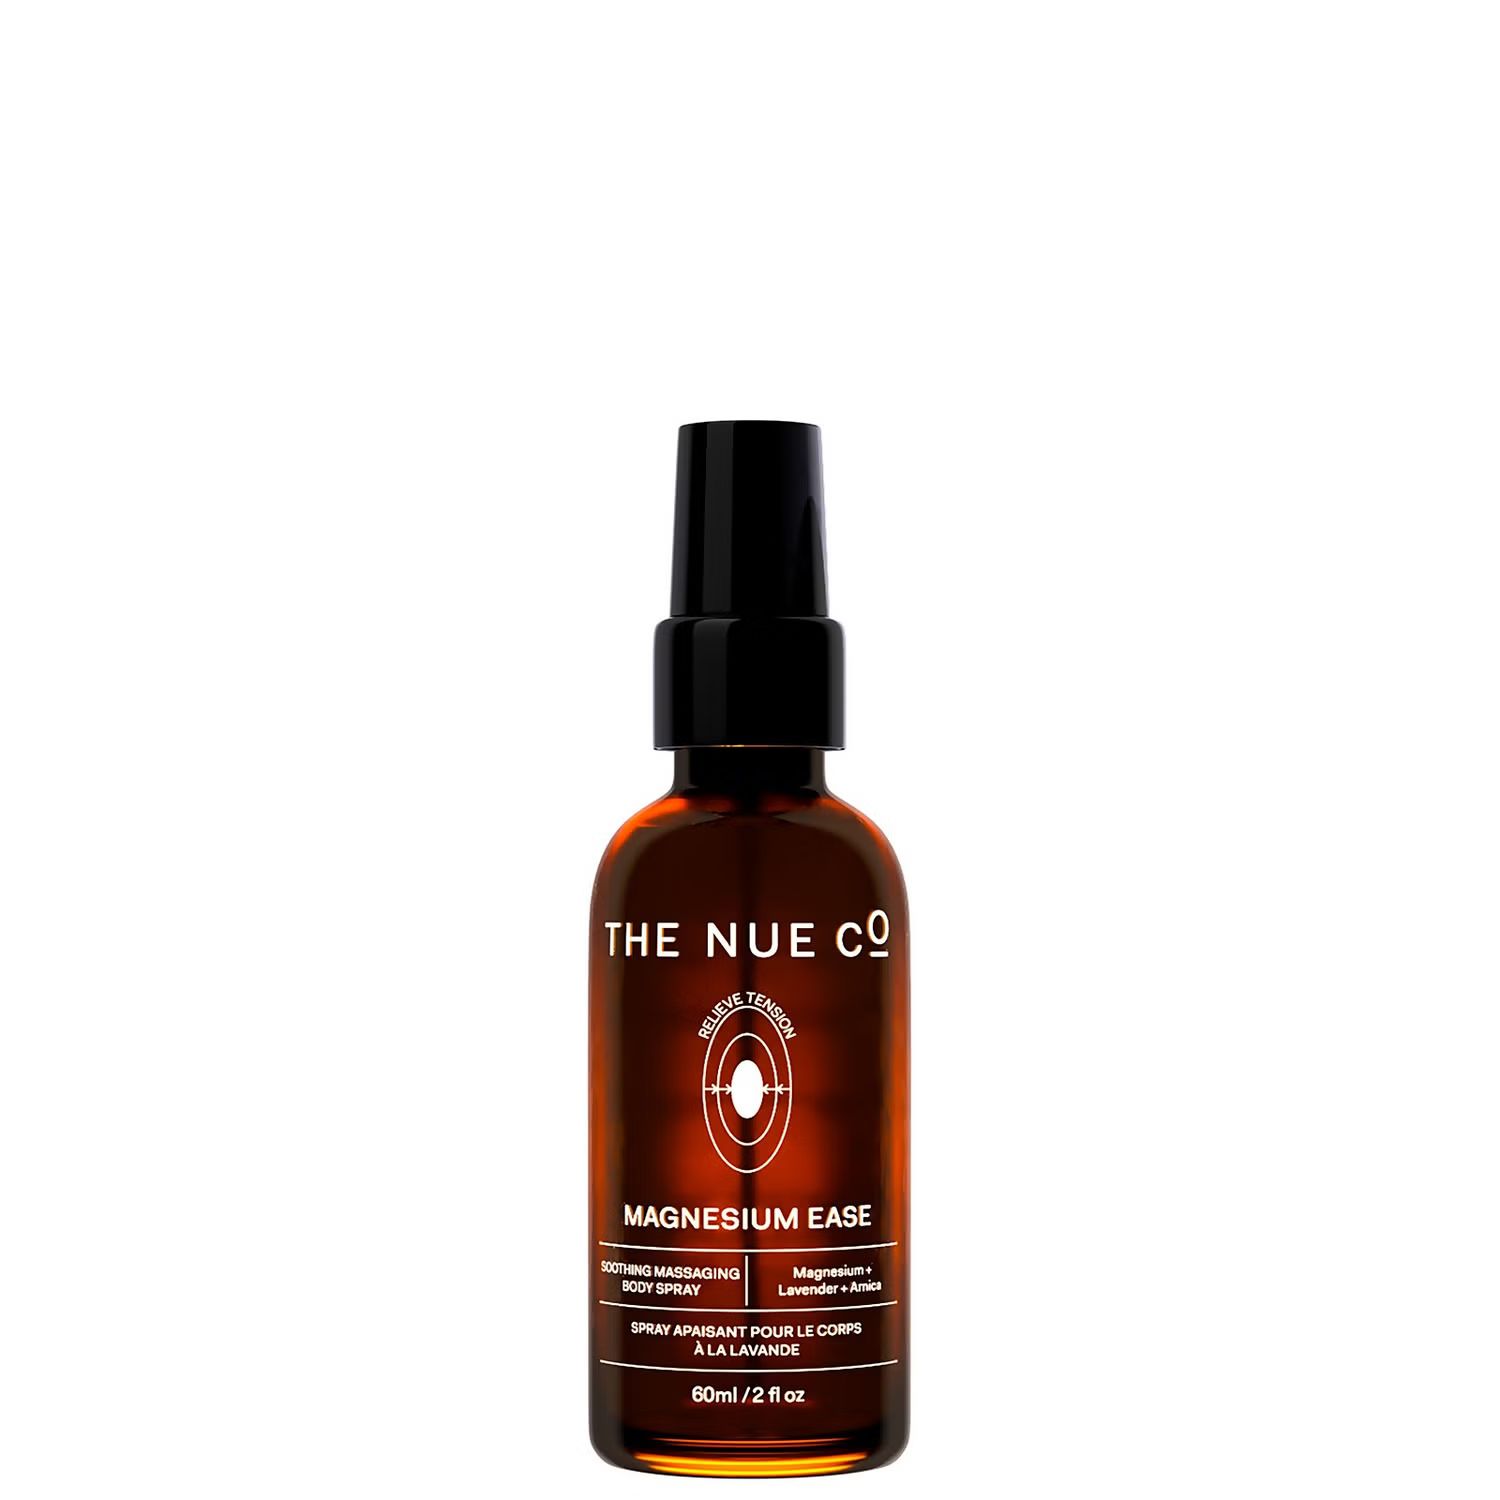 The Nue Co. Magnesium Ease 60ml | Cult Beauty